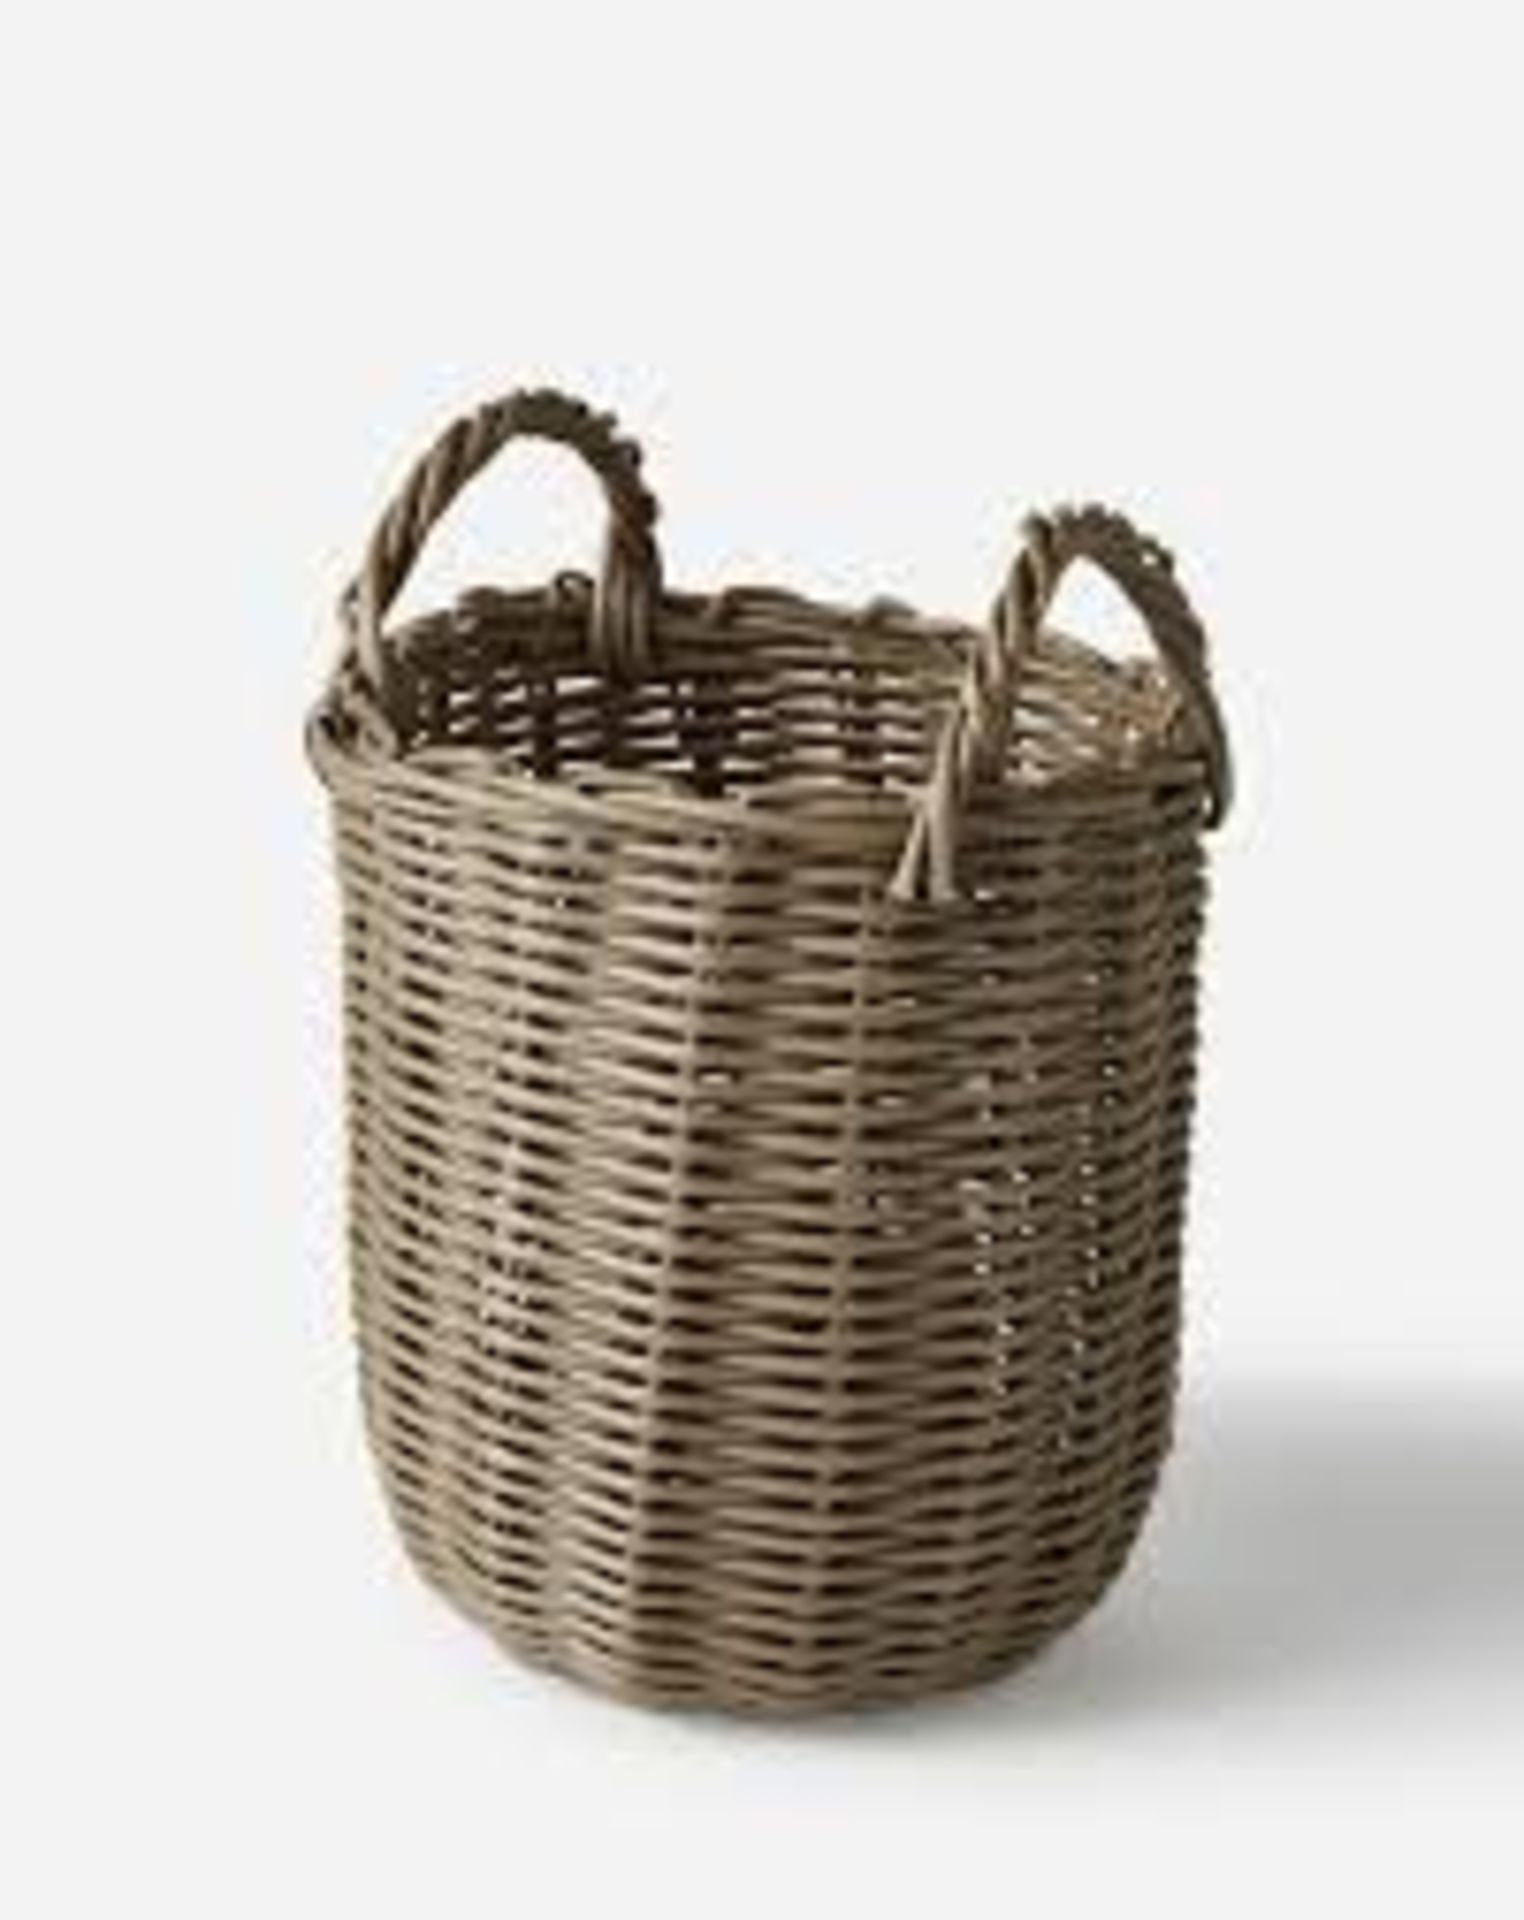 Woven Belly Basket. - ER22. This storage basket will sit perfectly in any living space, it is an